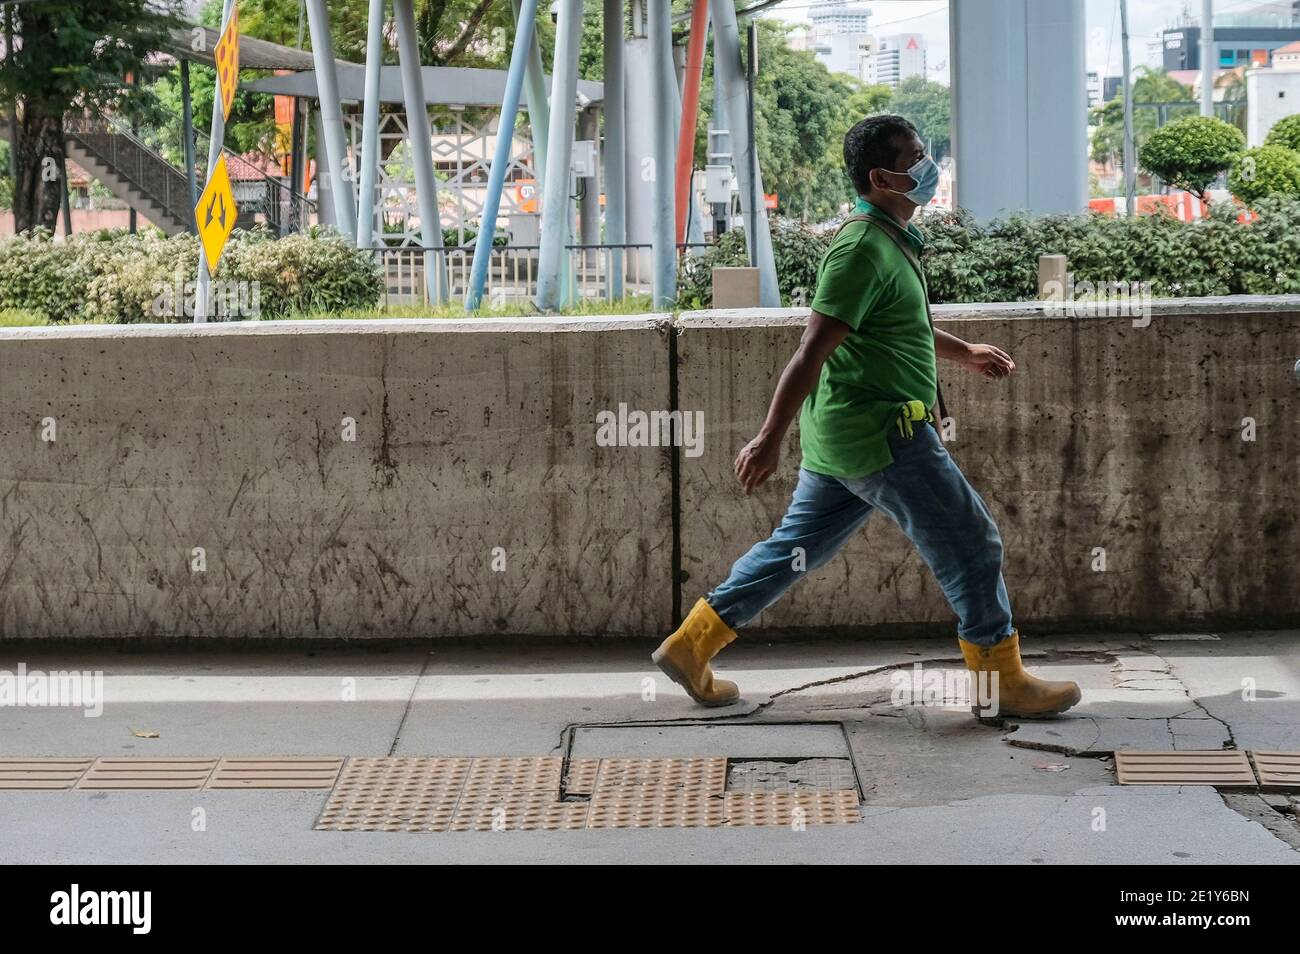 A foreign worker wearing a face mask as a precaution against the spread of Covid-19 walks on the street in Kuala Lumpur. Stock Photo